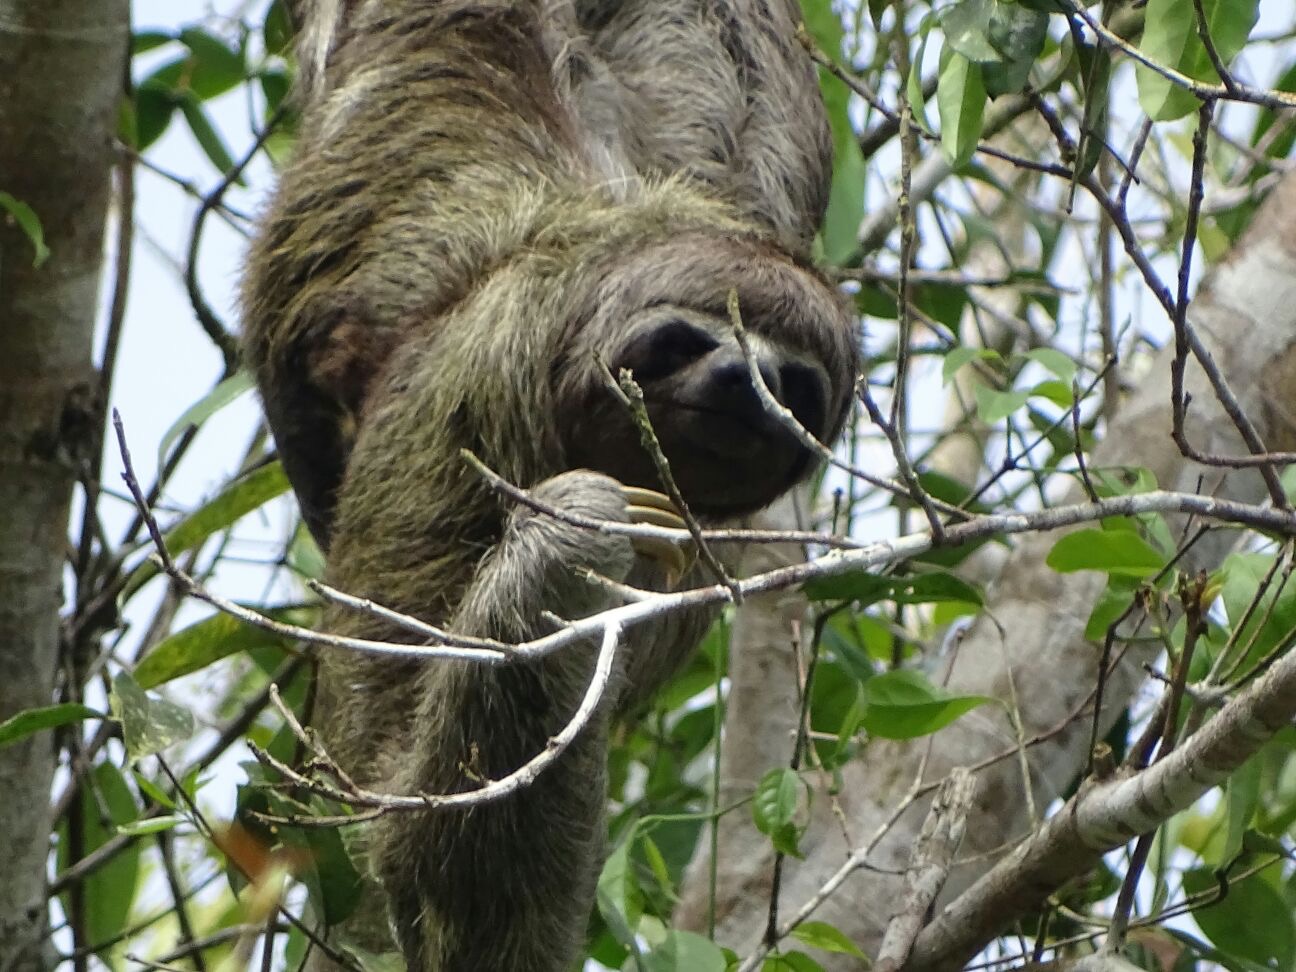 Say Hello to a Sloth